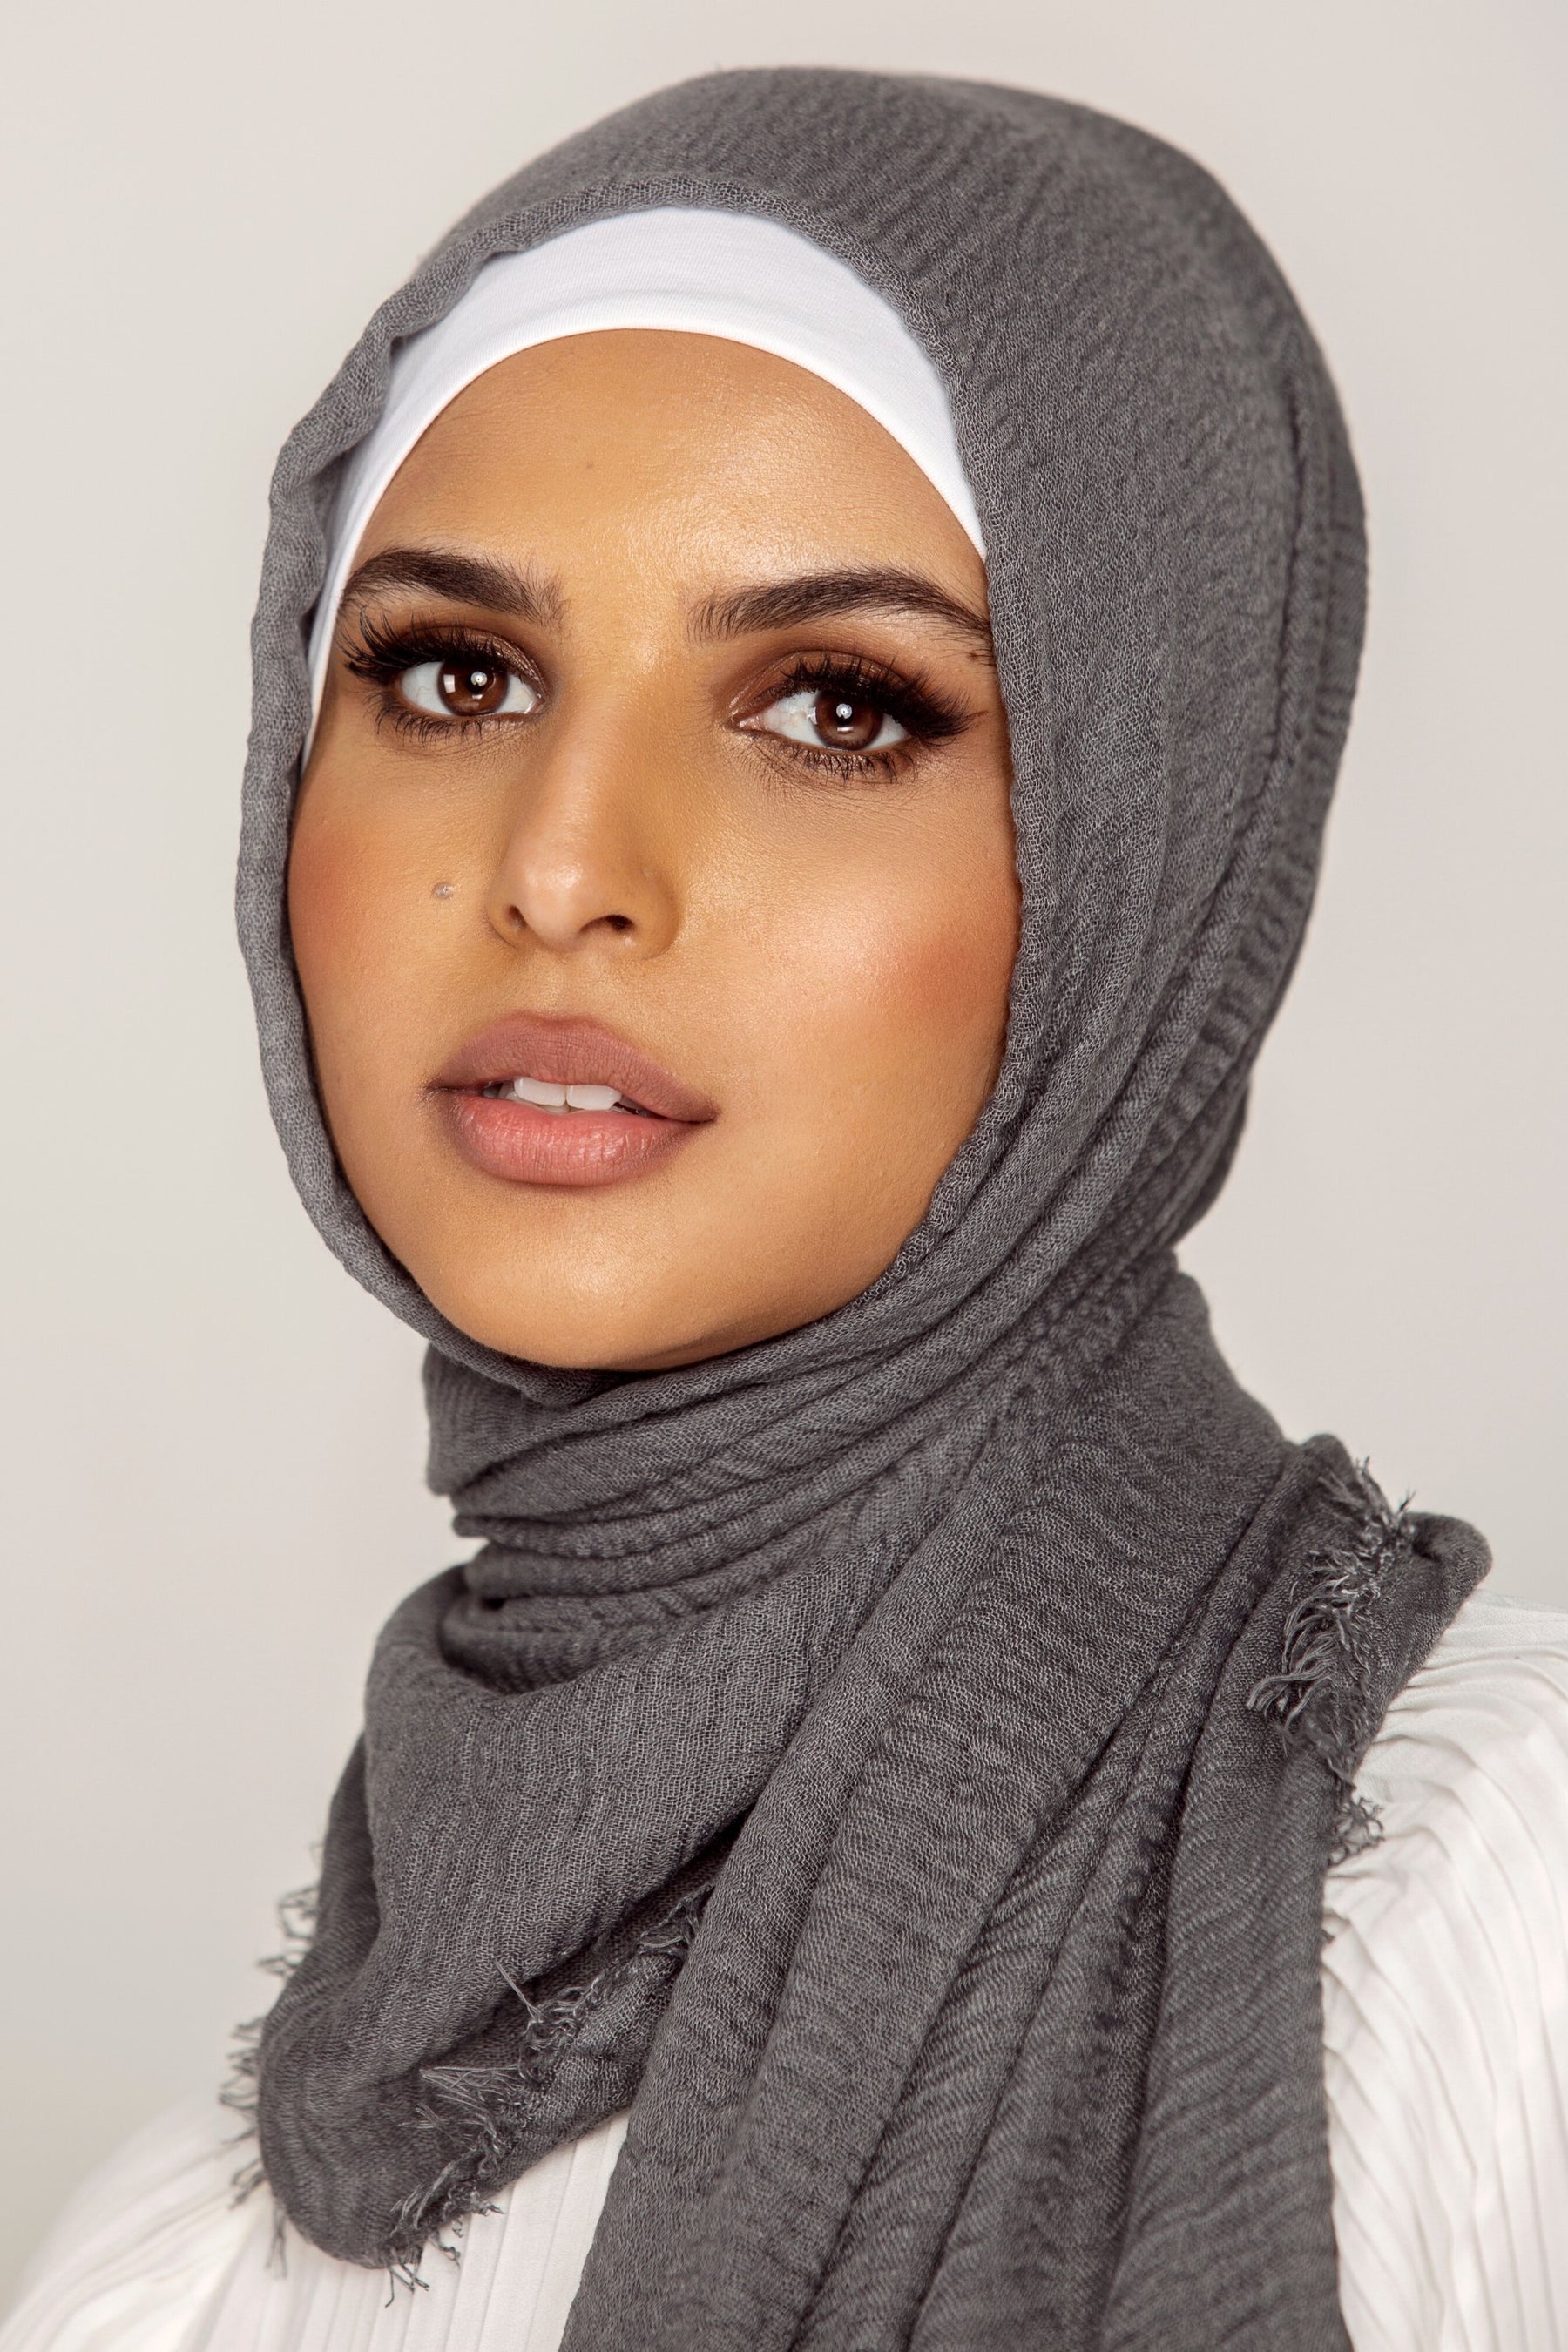 Everyday Crinkle Hijab - Charcoal Veiled Collection 